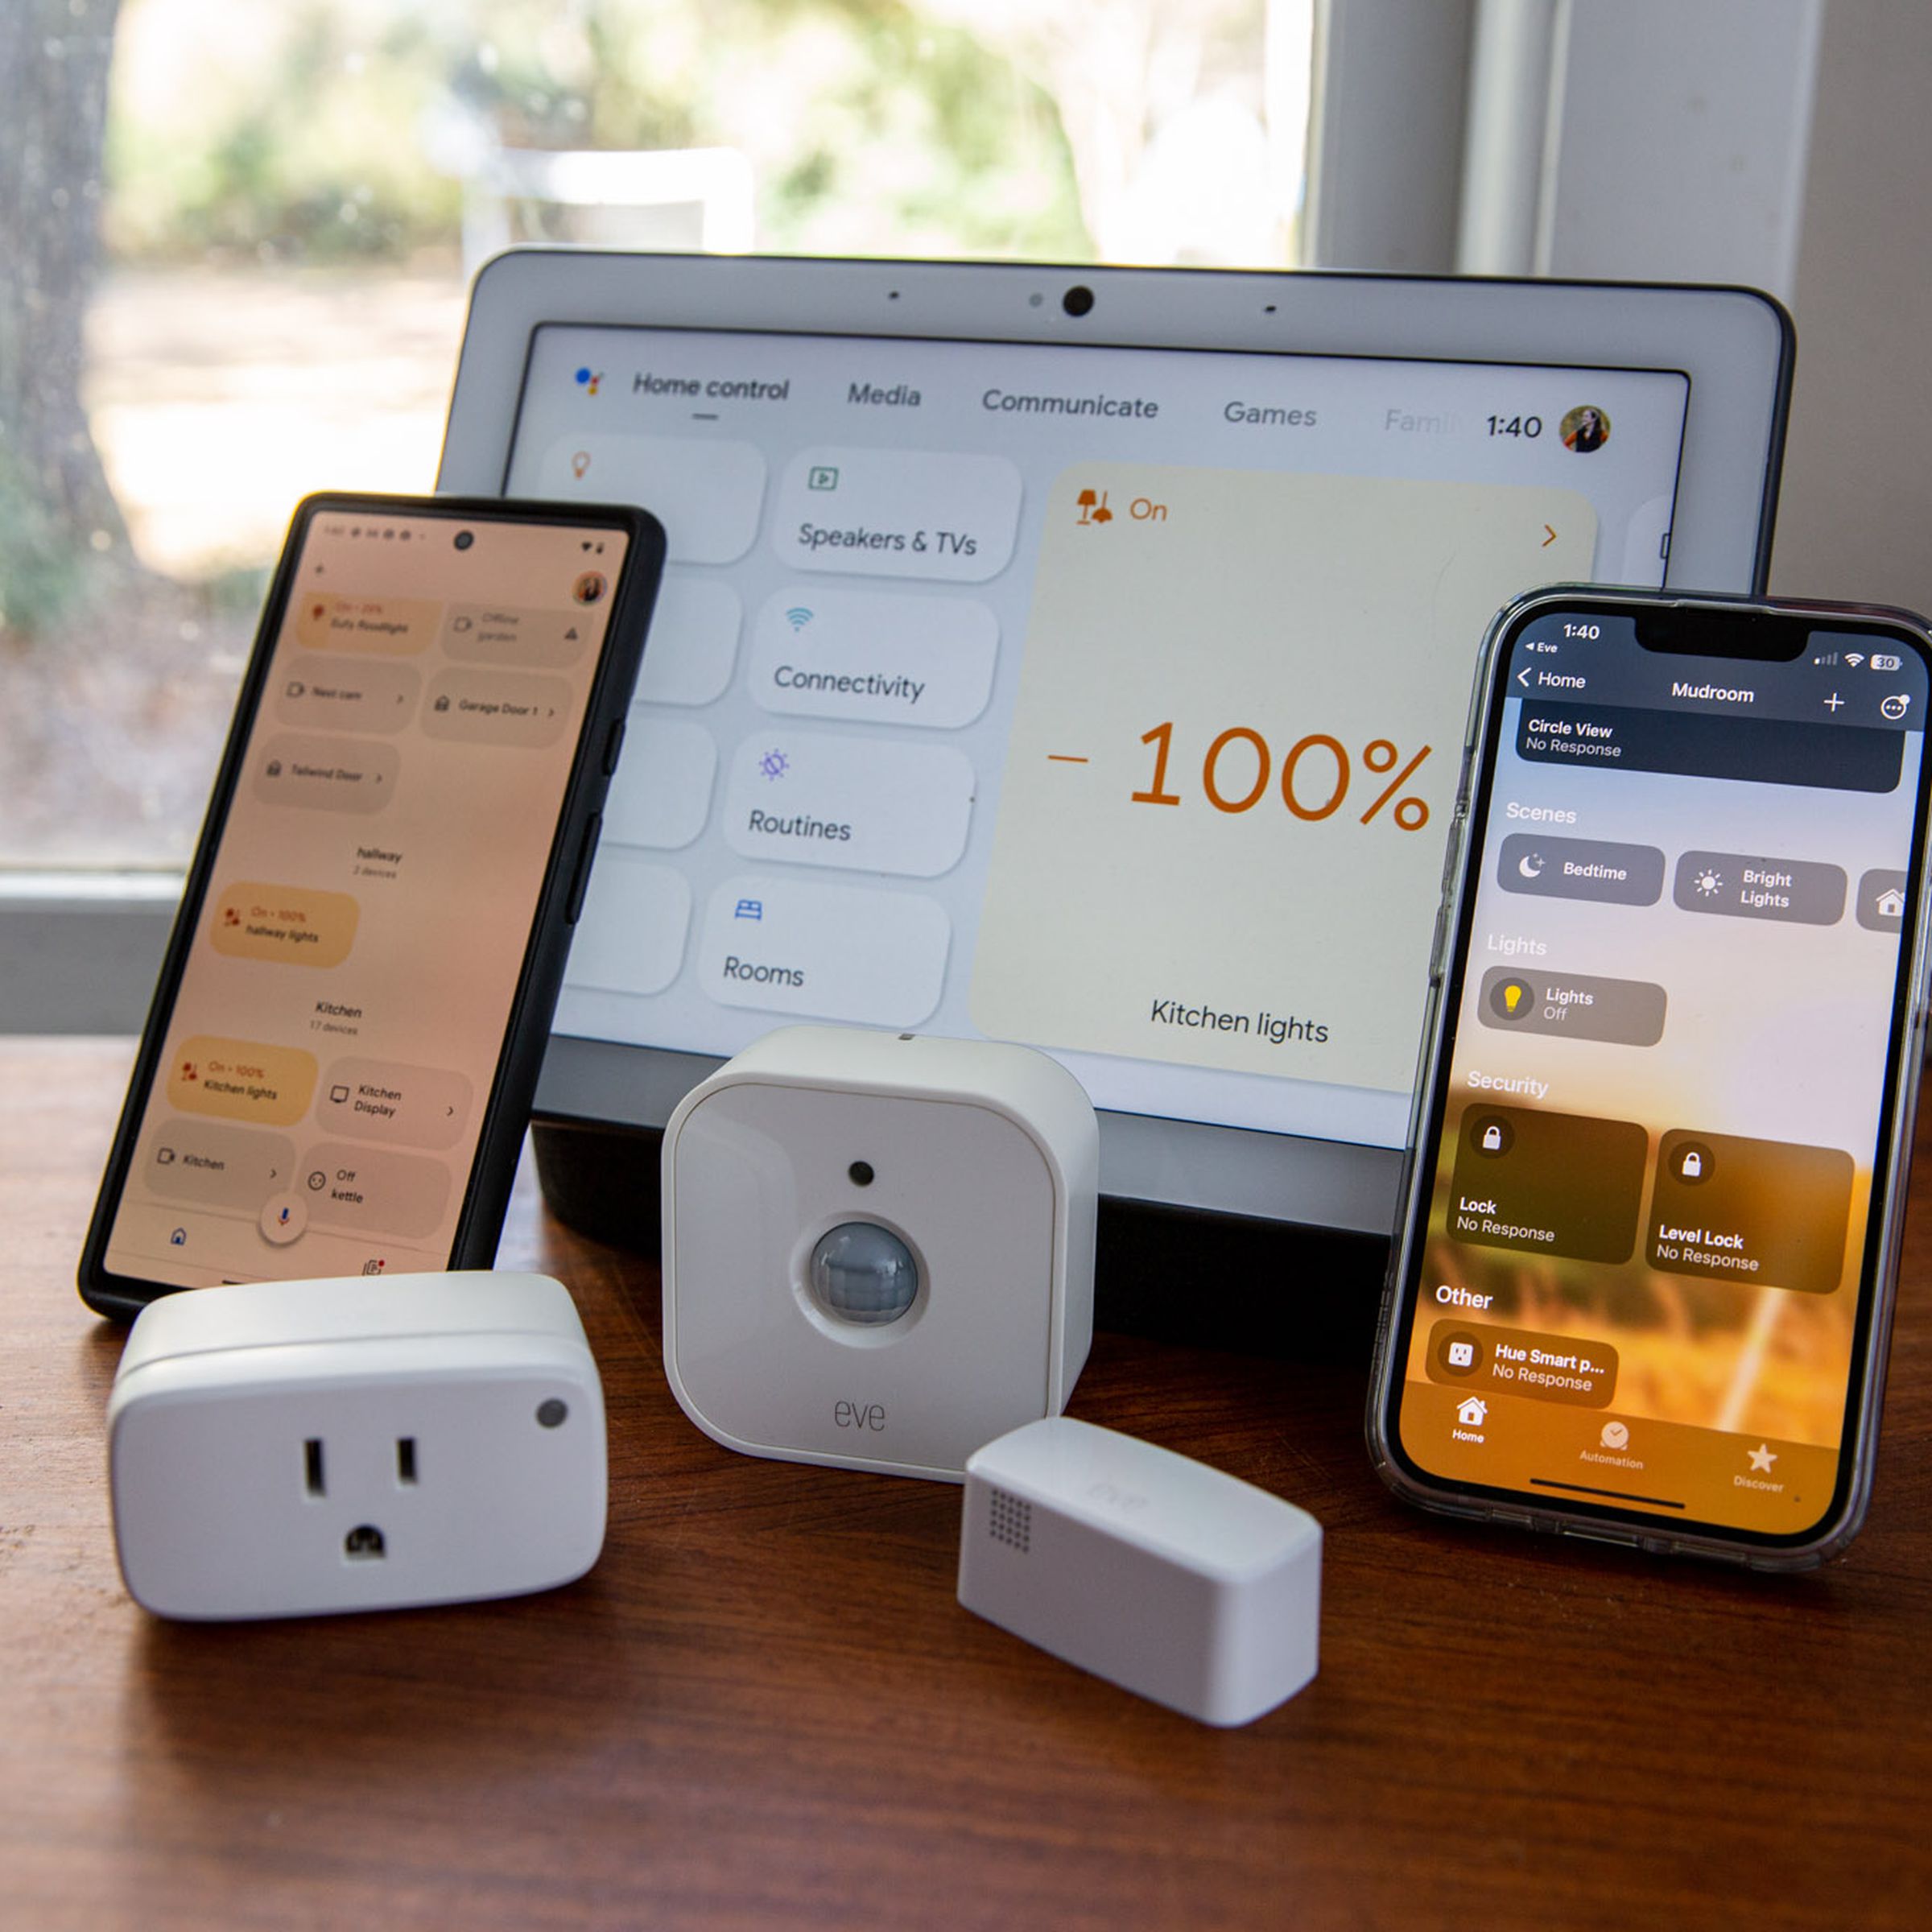 The once HomeKit-only Eve devices now work with Google Home and Samsung SmartThings — if you jump through some large hoops.